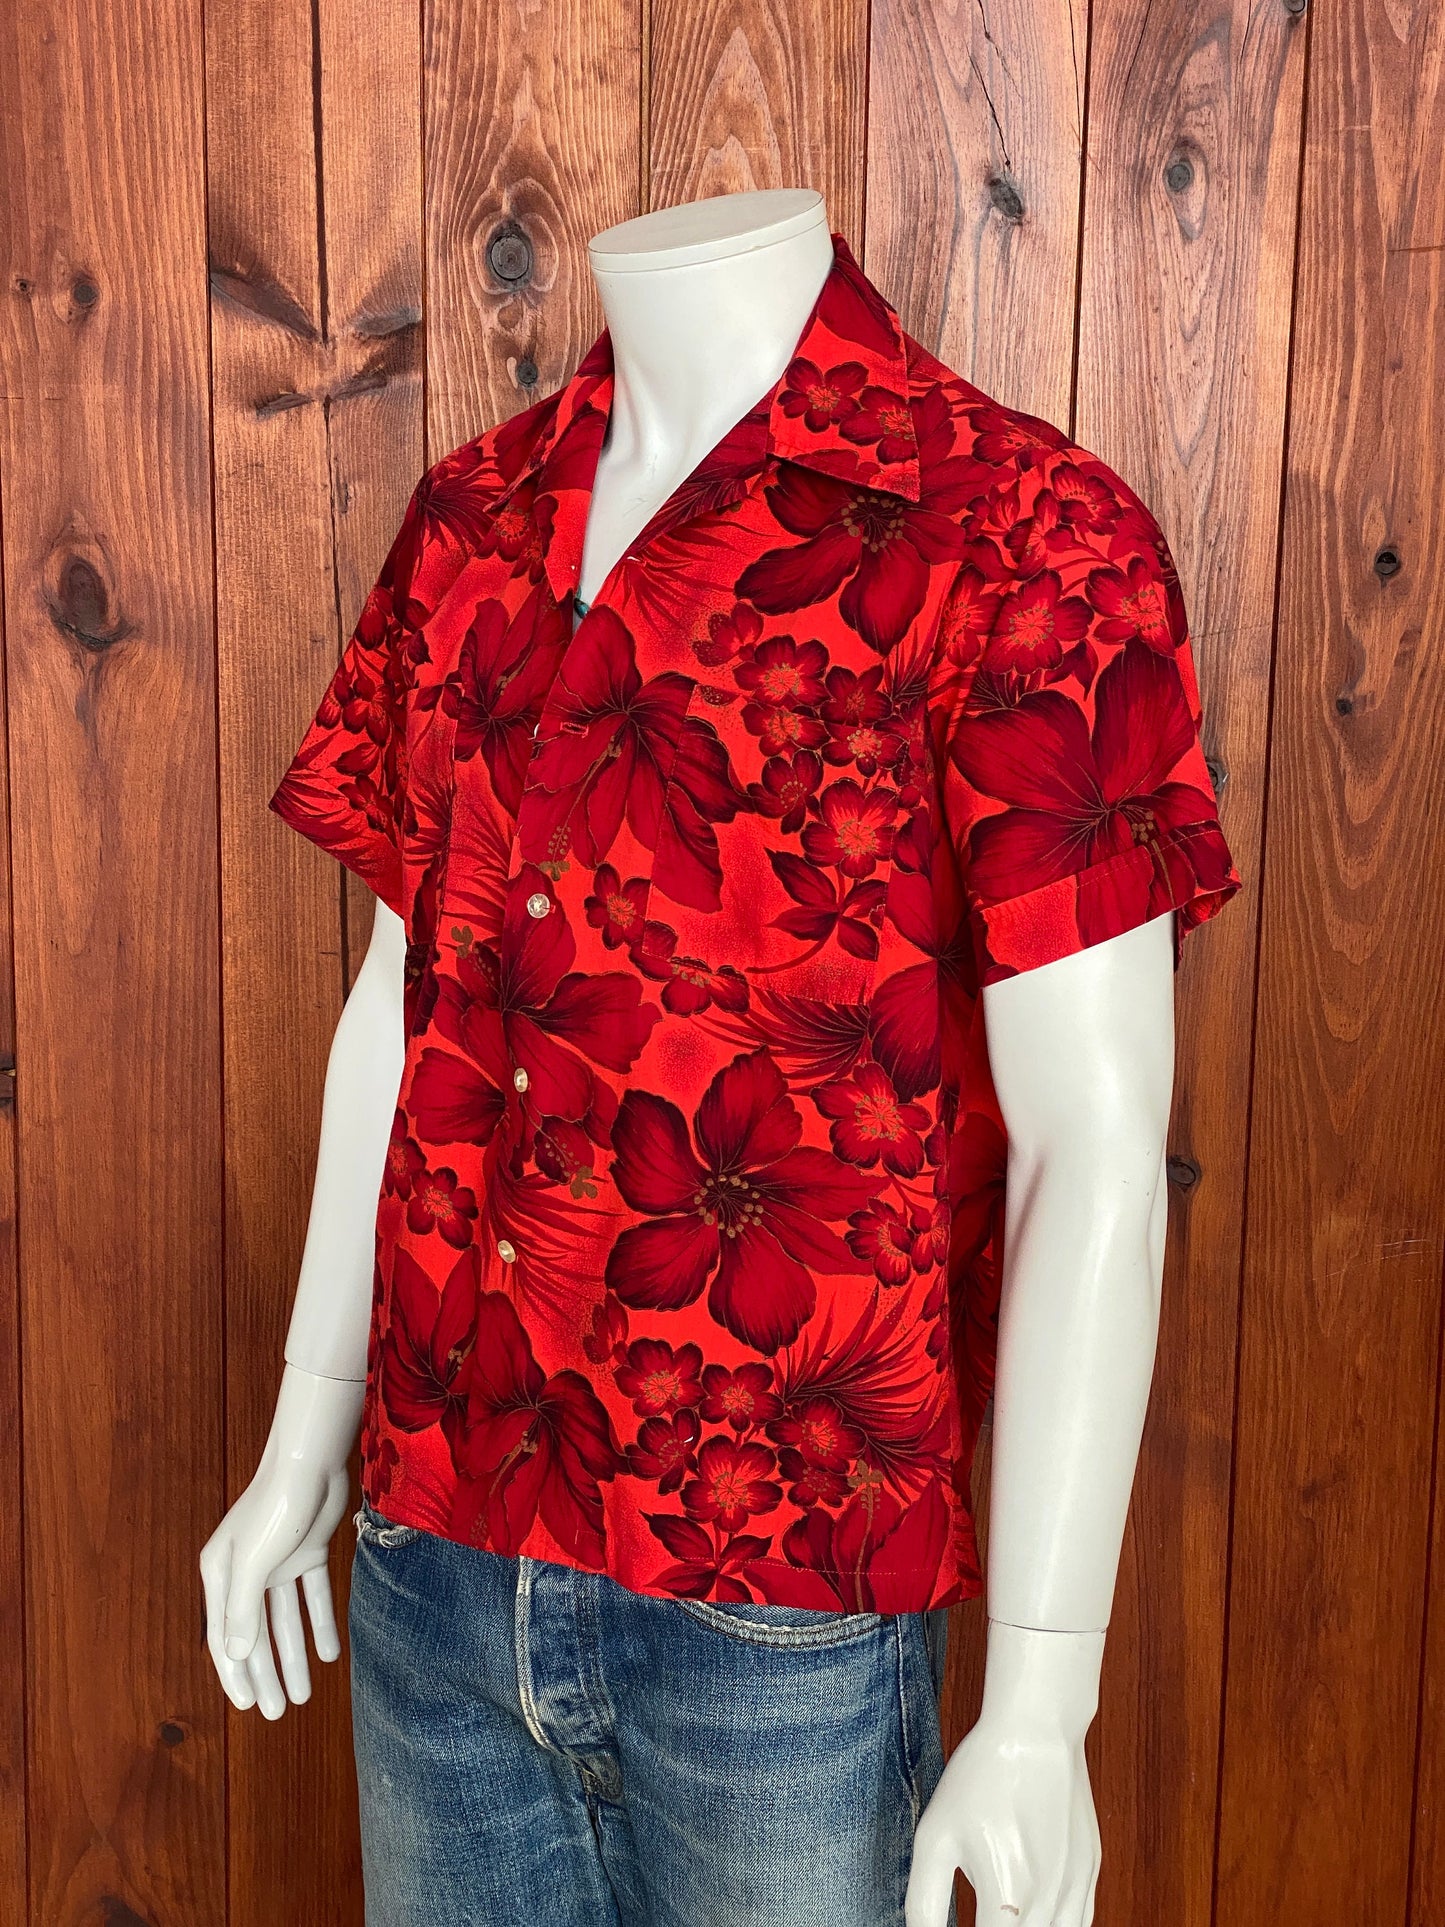 Medium Size Vintage Authentic 60s Hawaiian Shirt, Thin Cotton, Made in USA - Tropical Collectible